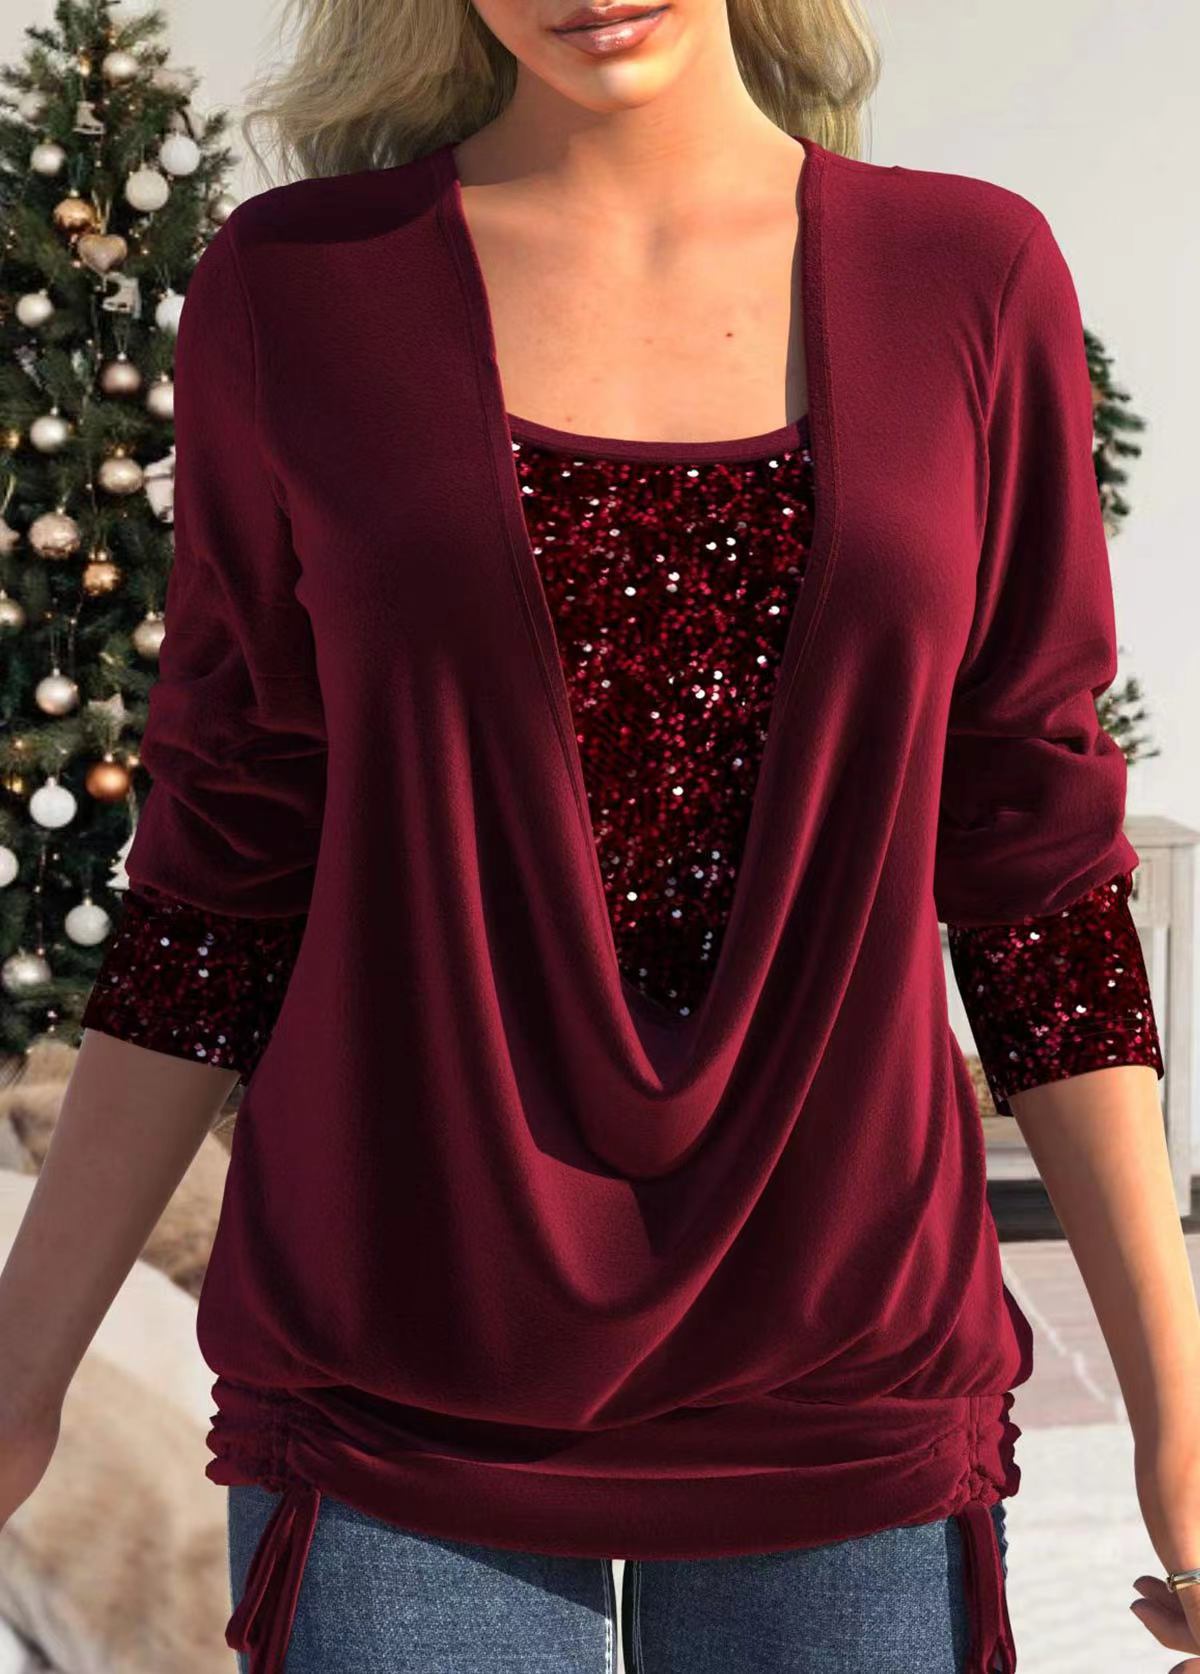 Solid Color 3/4 Sleeve Doubled Pleated Top Blouse